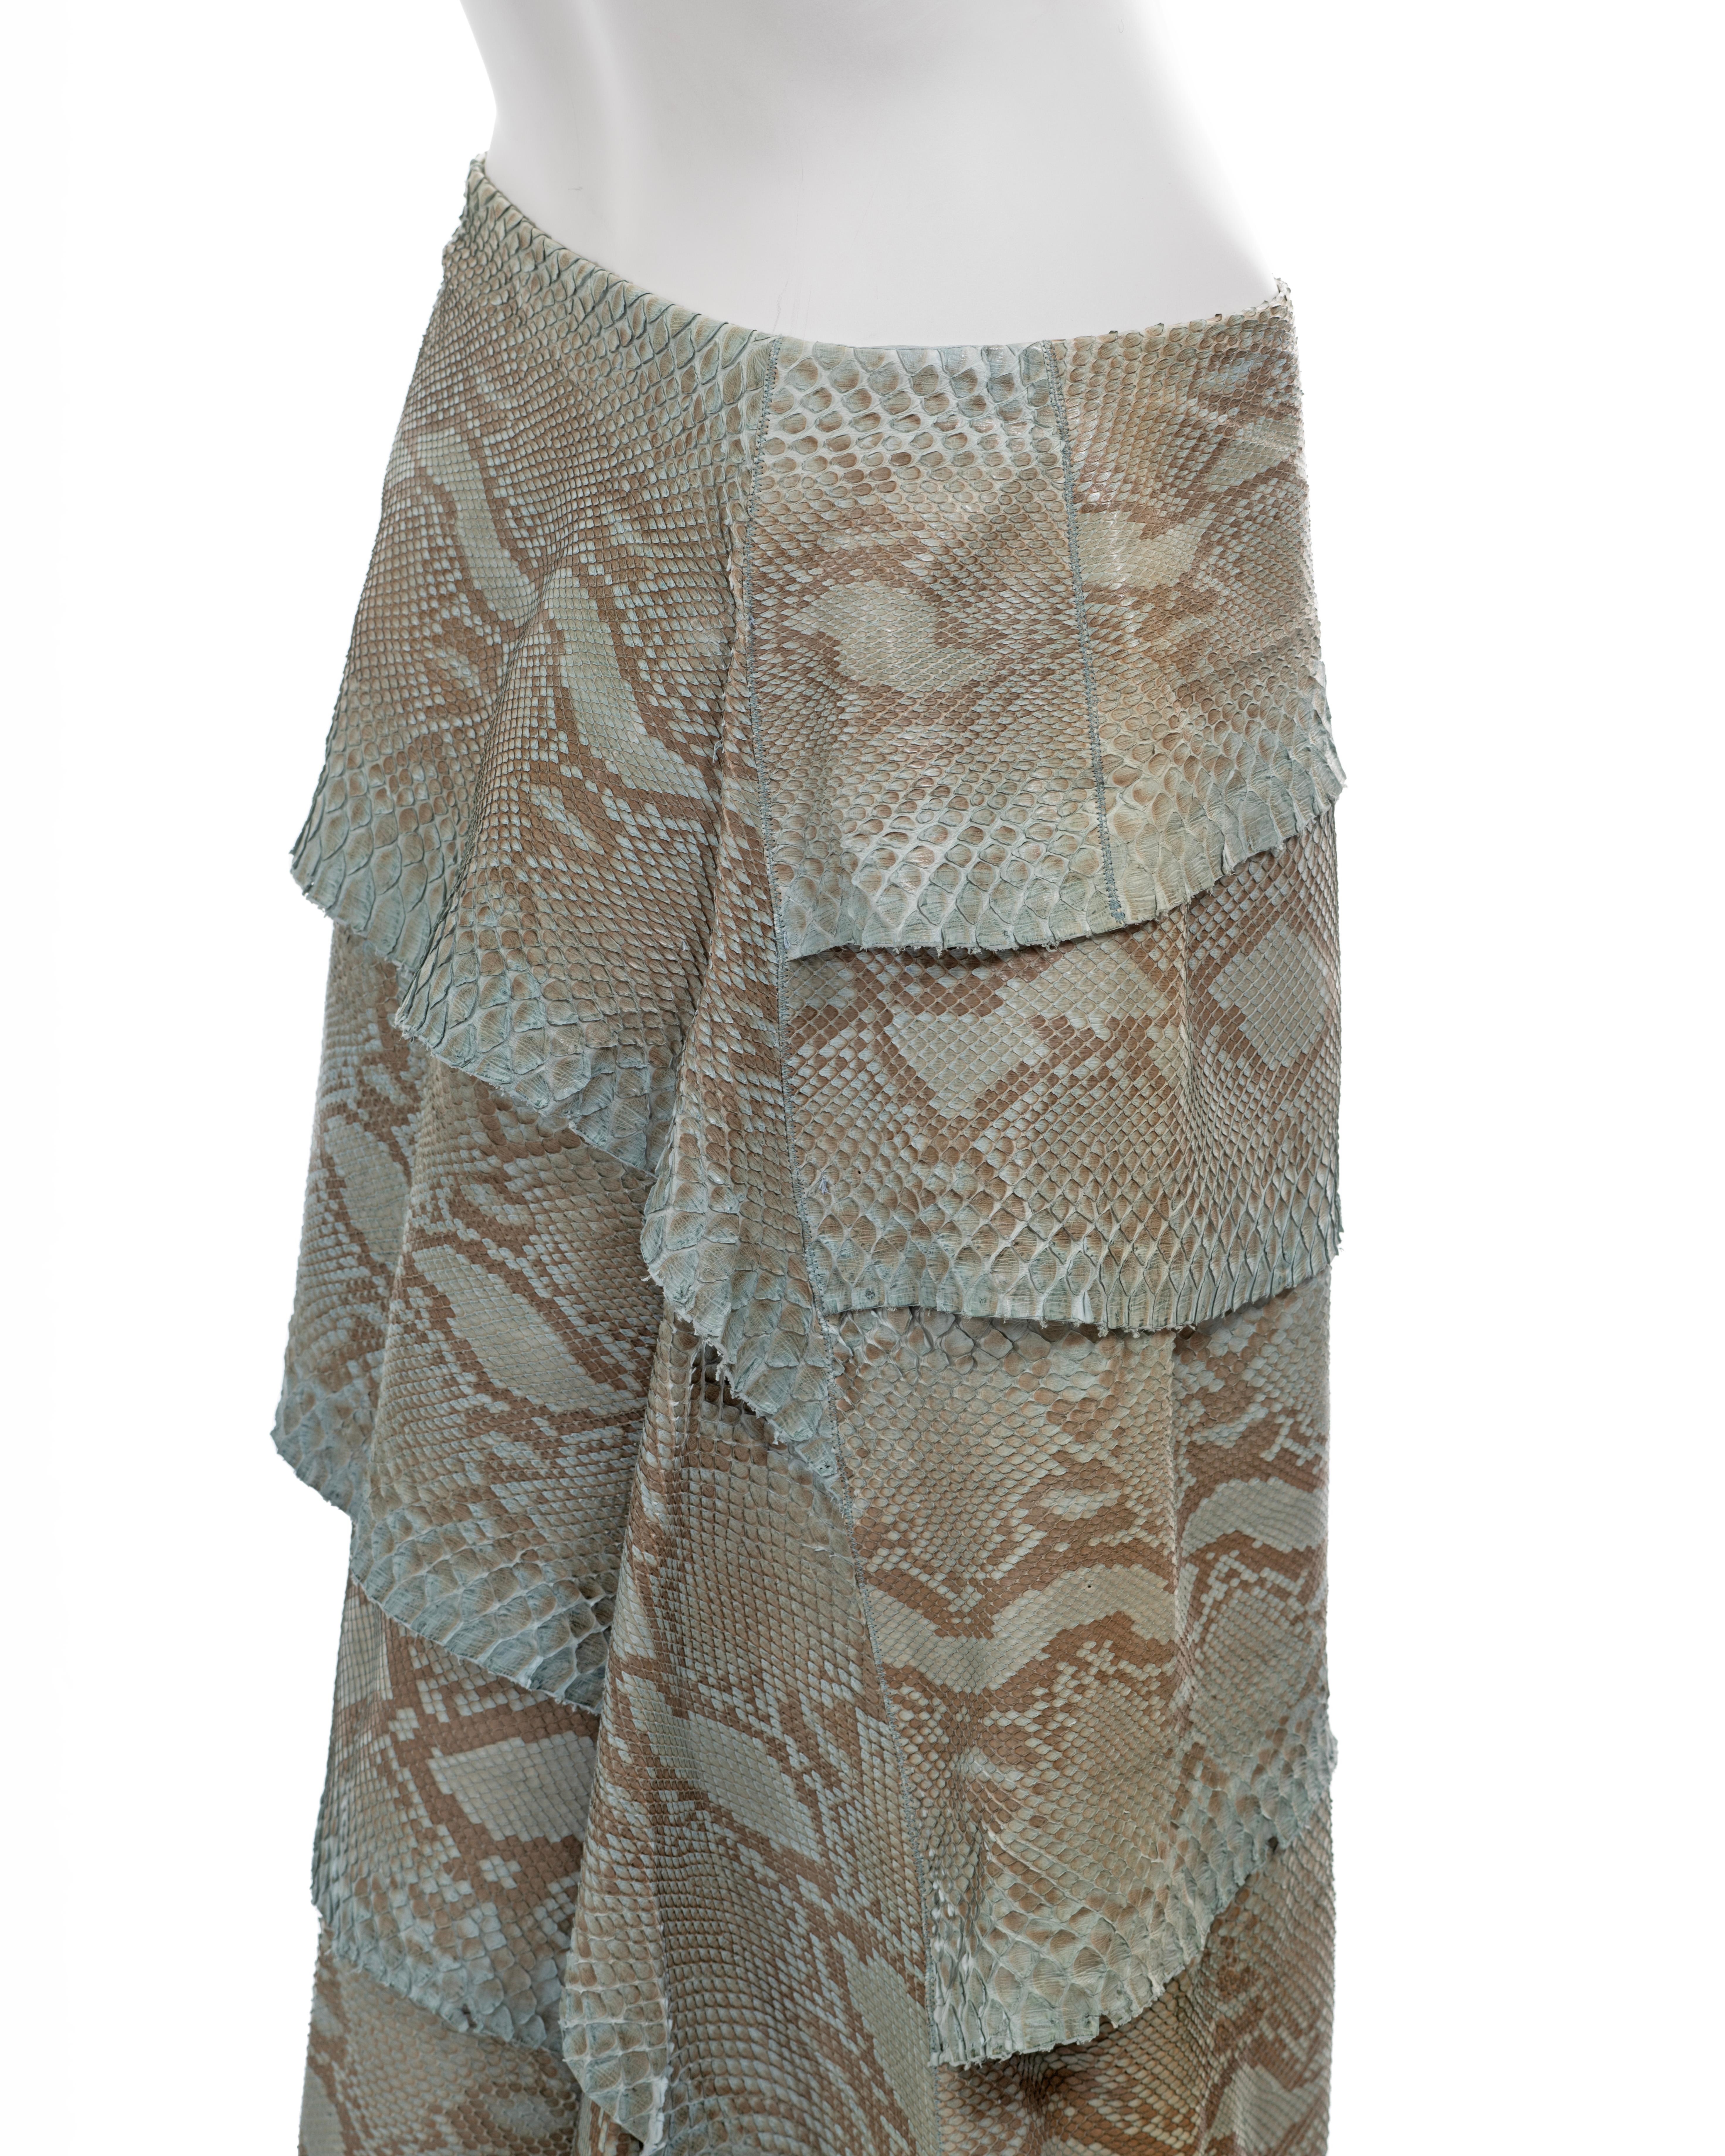 Gianni Versace turquoise python tiered skirt, fw 1999 For Sale 5